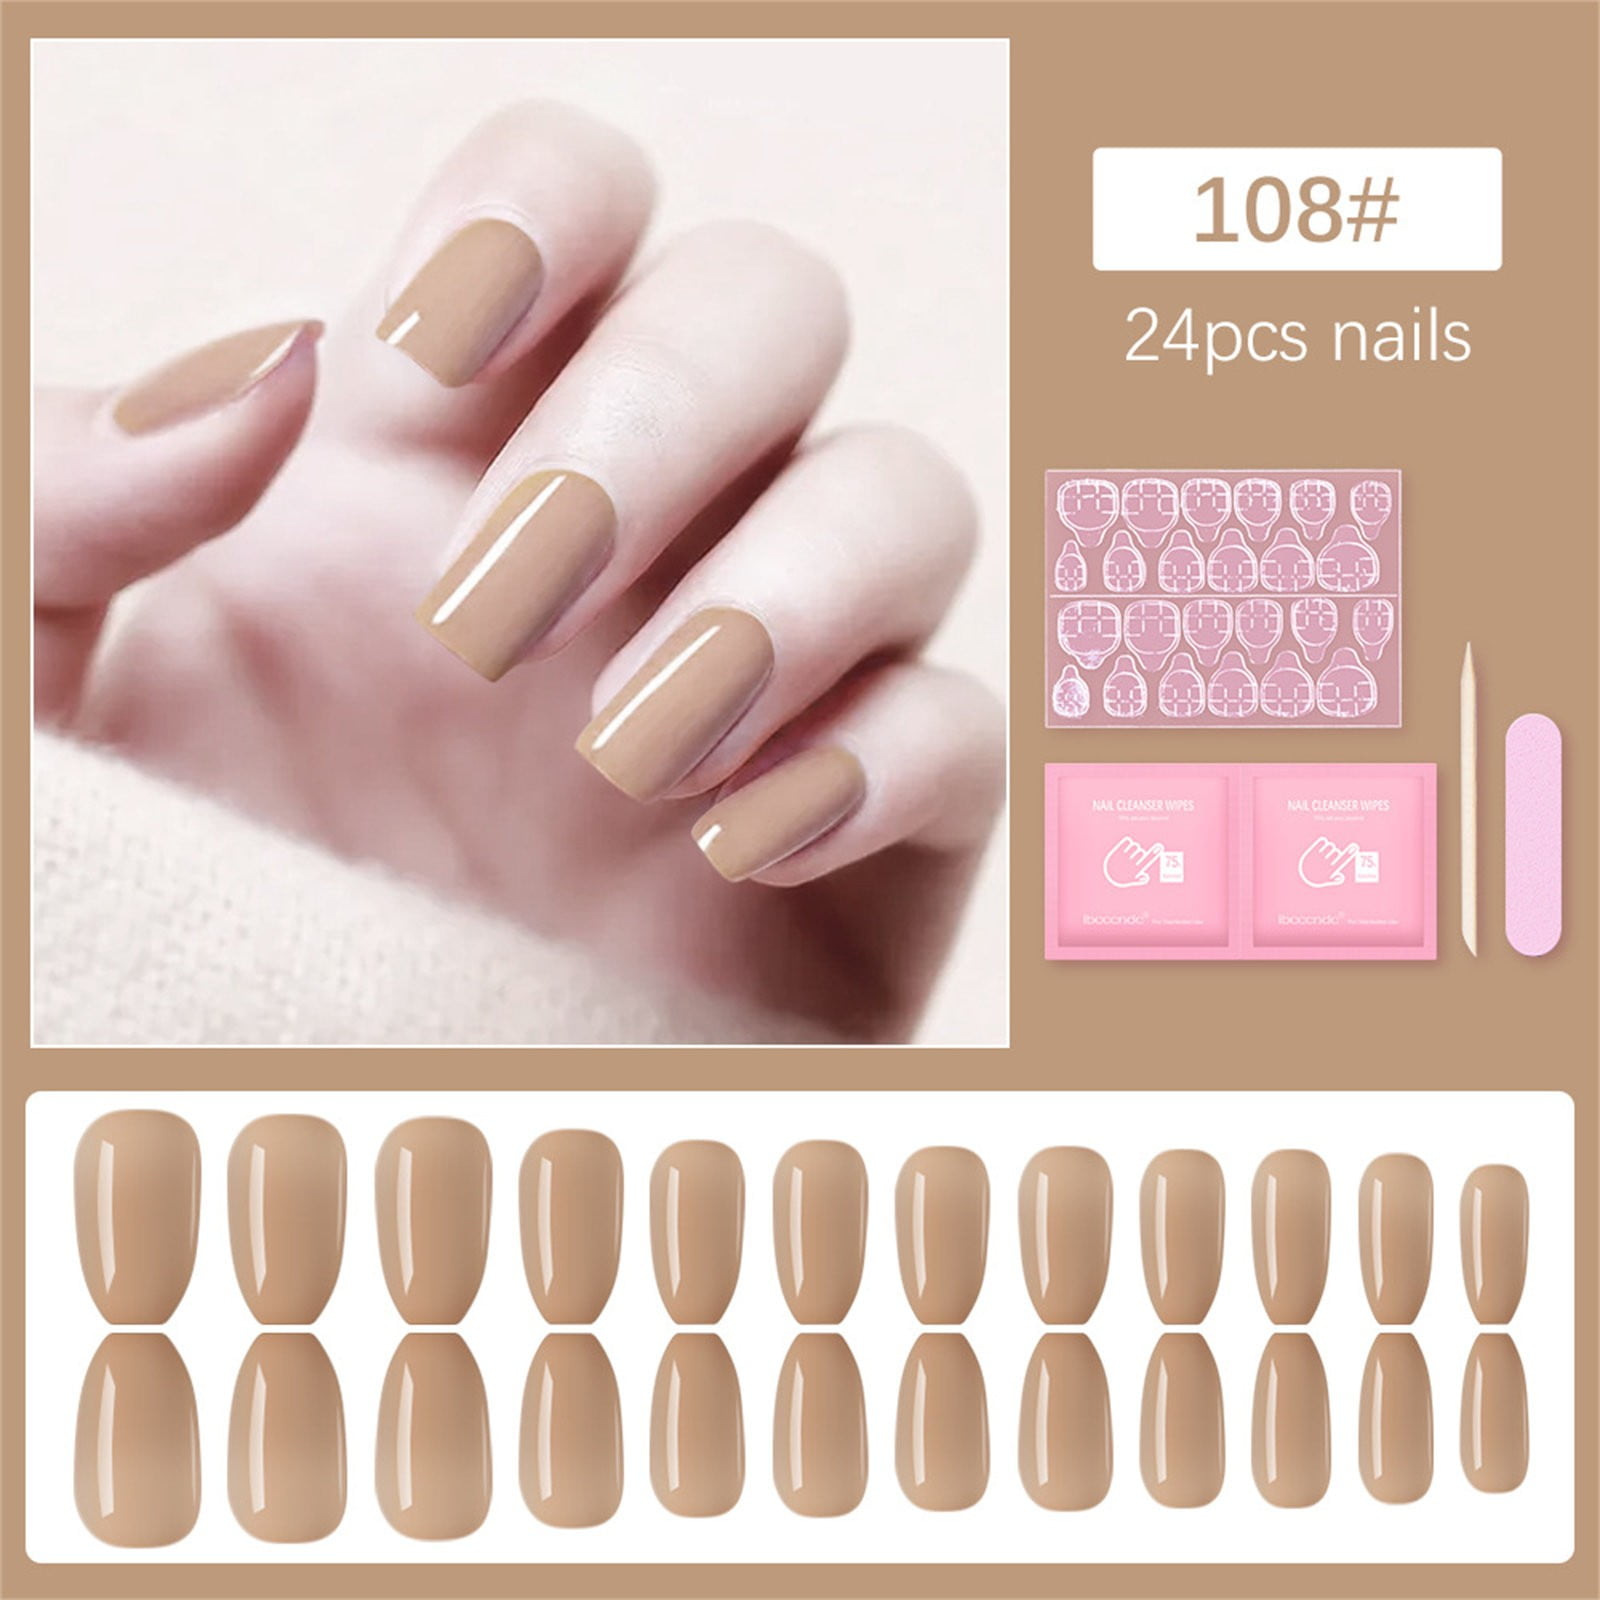 5 steps for the perfect 'at-home' manicure – Kester Black Australia